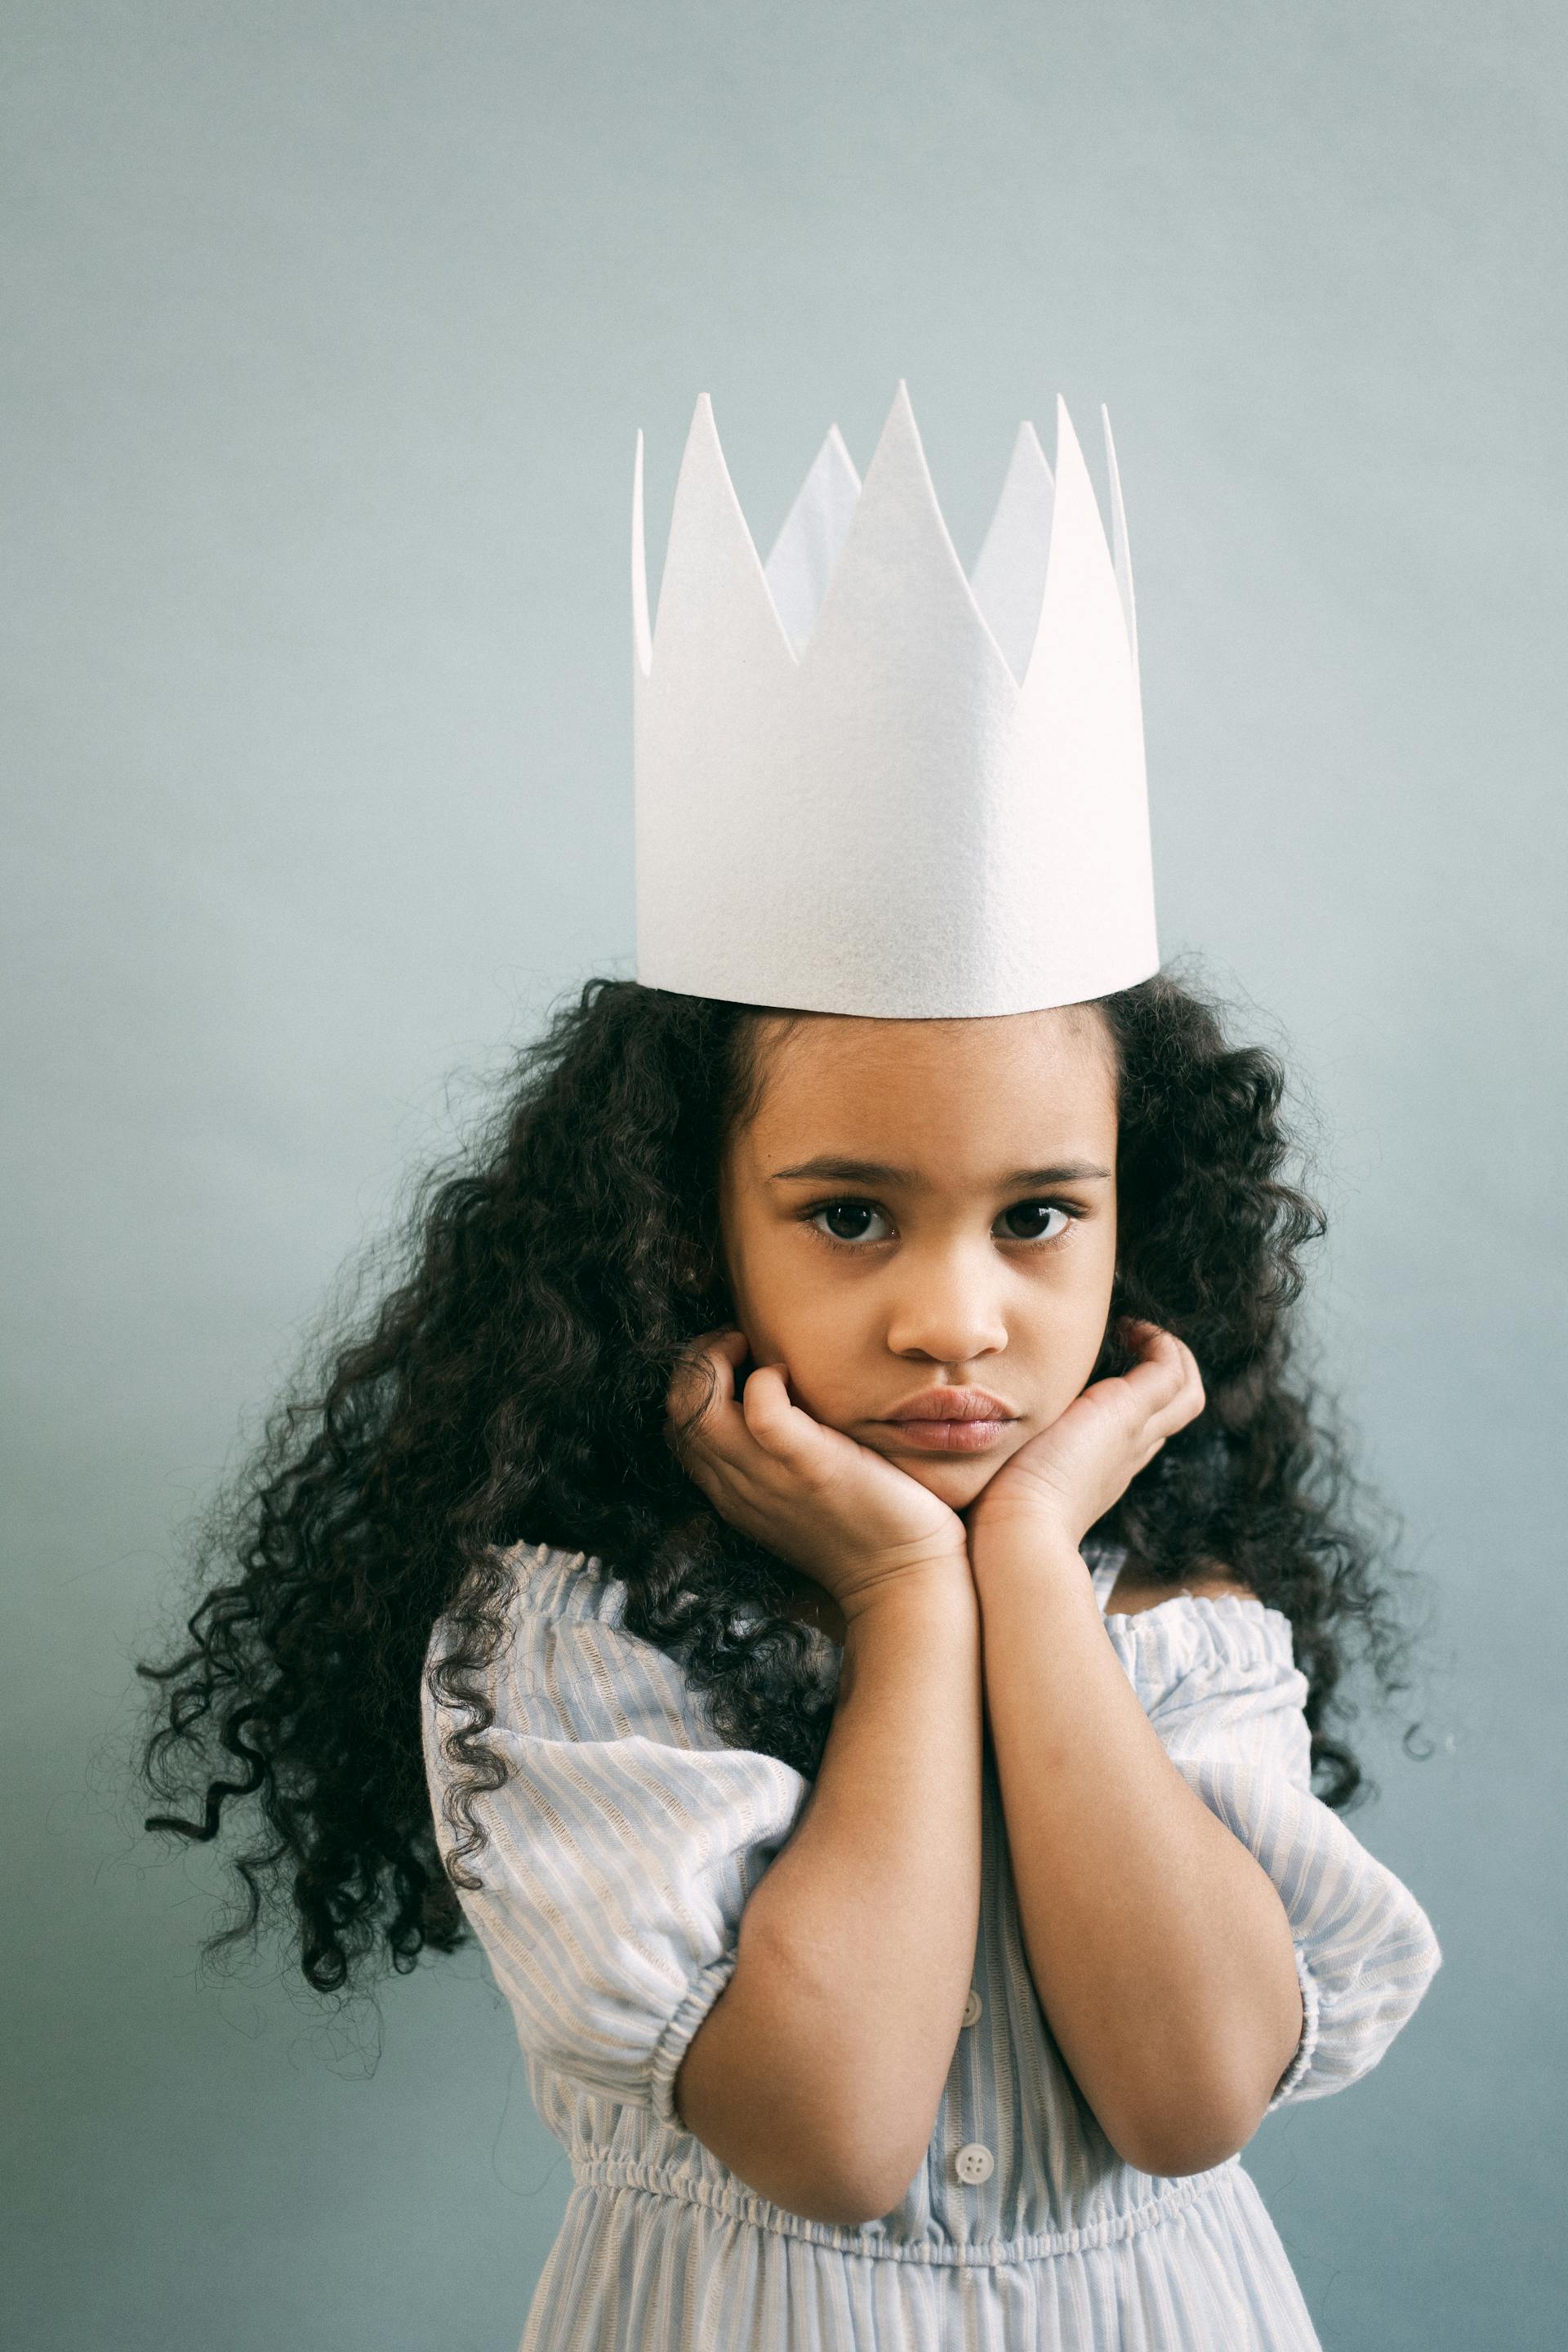 A little girl in a princess outfit | Source: Pexels